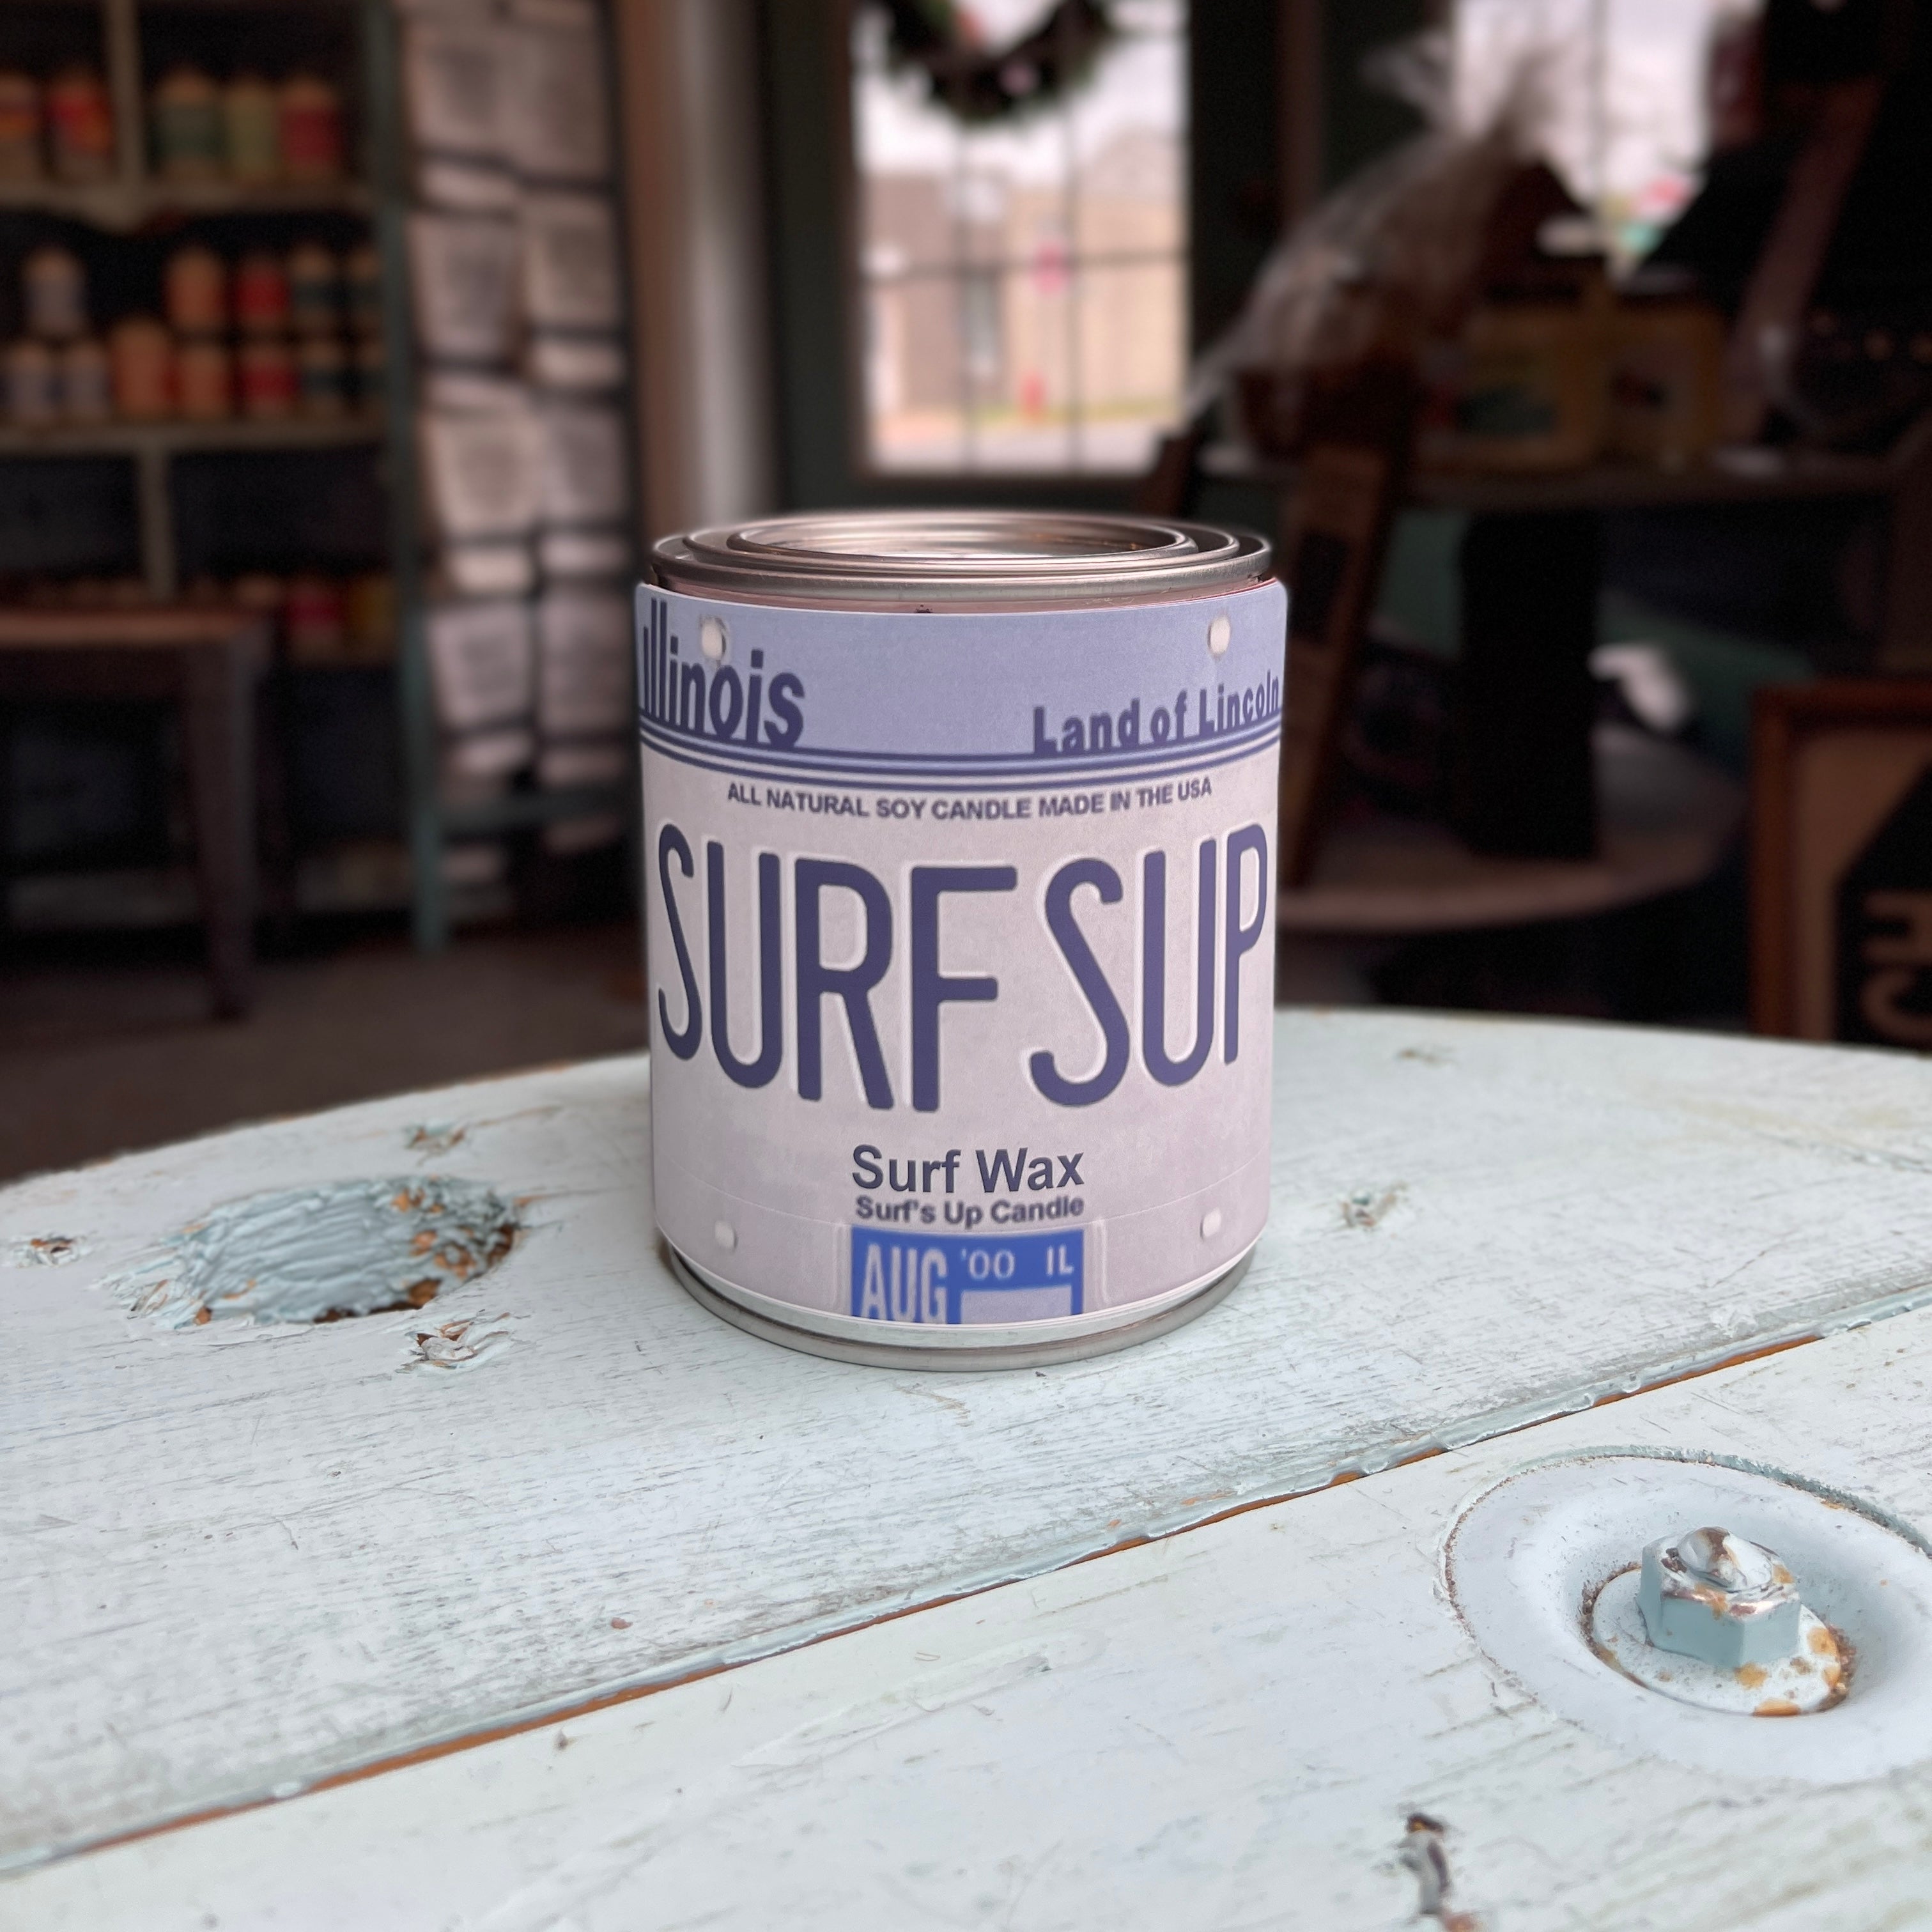 Illinois License Plate Surf Wax Paint Can Candle